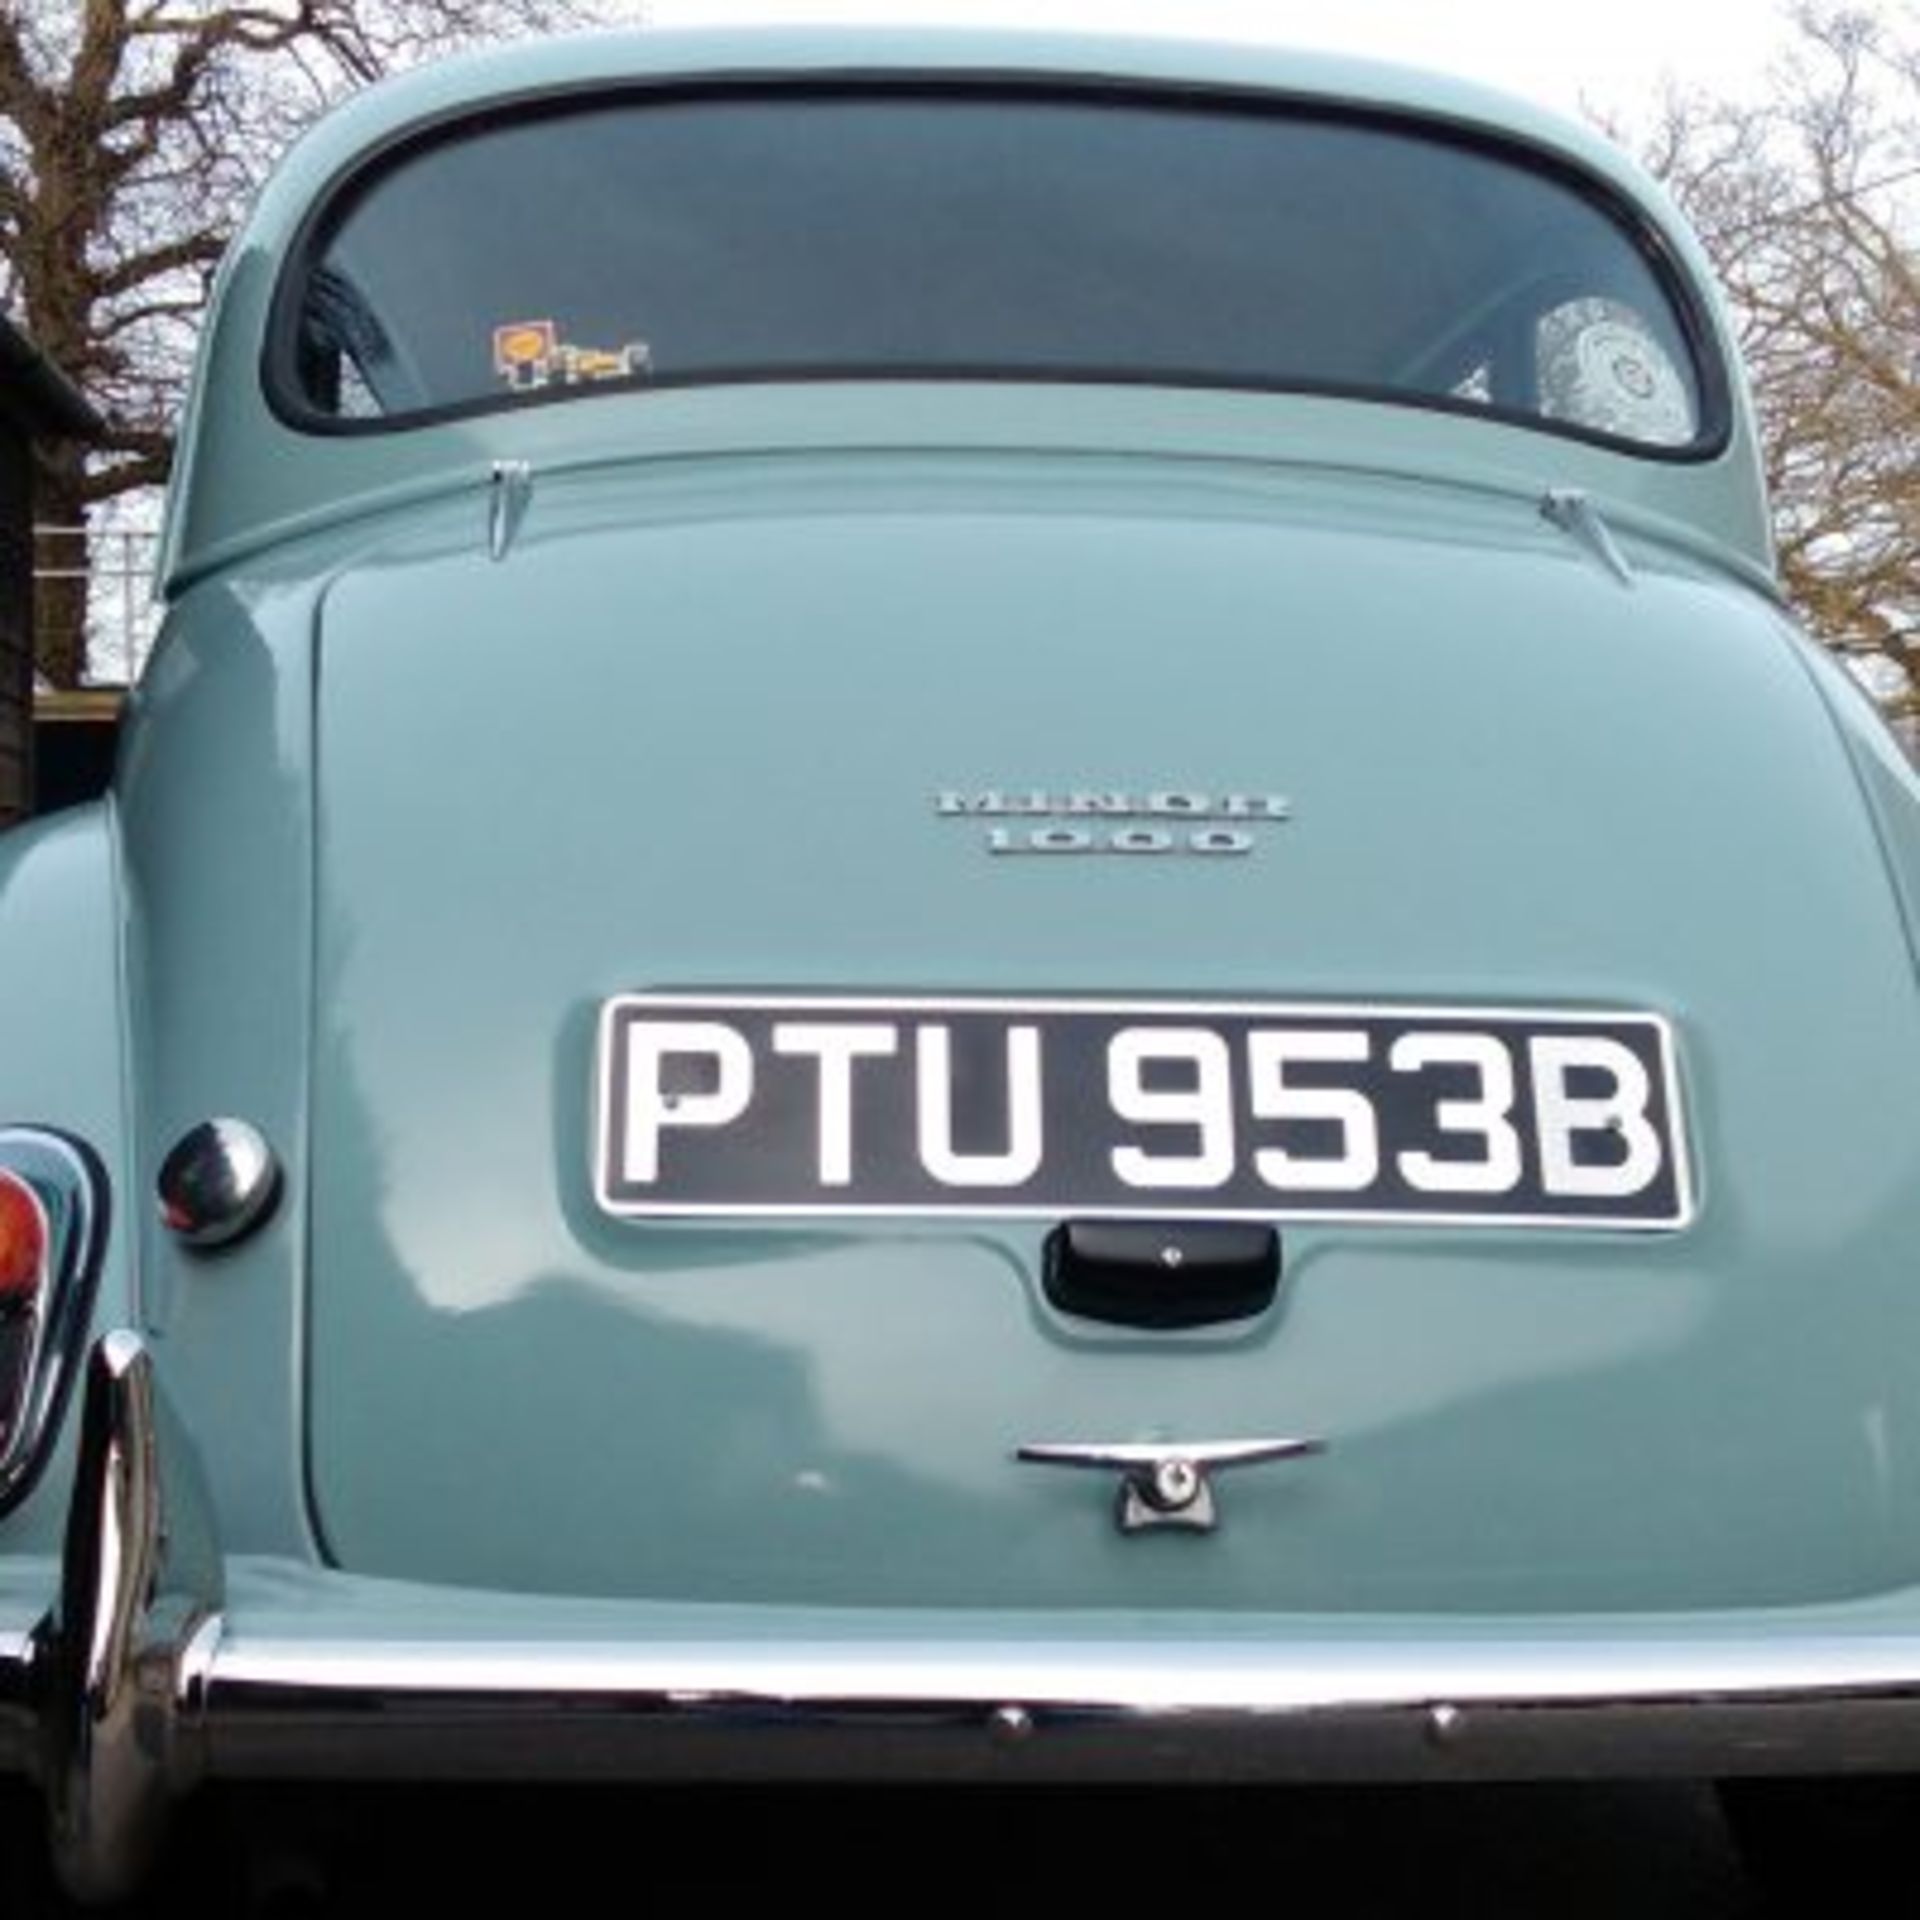 Morris Minor “Low mileage” 1964 - This lovely low mileage 1964 “Moggy Minor” has been owned by the - Image 5 of 14